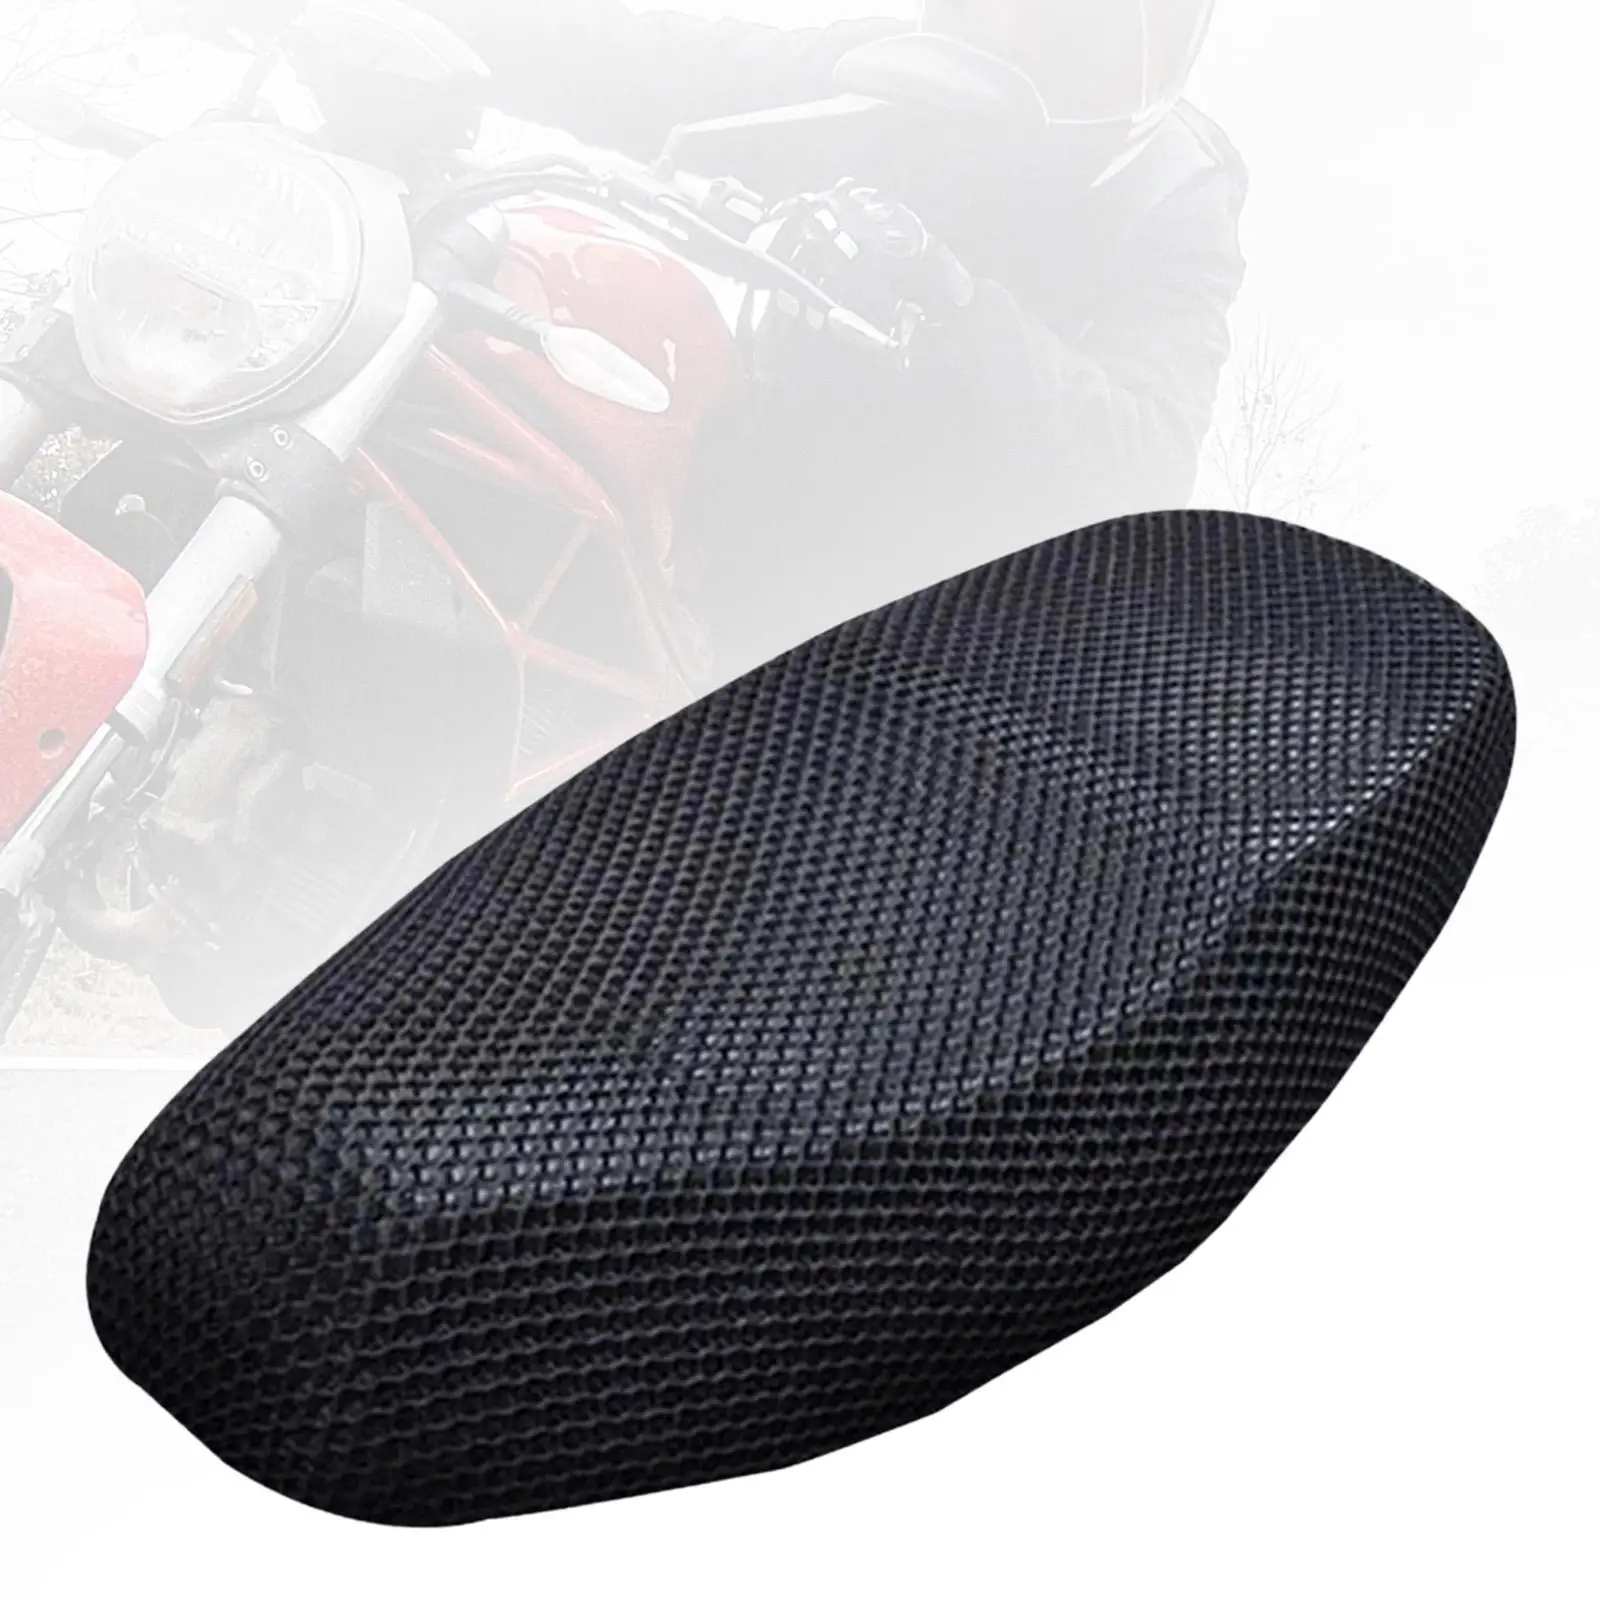 Motorcycle Seat Mesh Cover Comfortable Replacement Heat Resistance Accessories Universal Thicken Nonskid Motor Seat Pad Cover